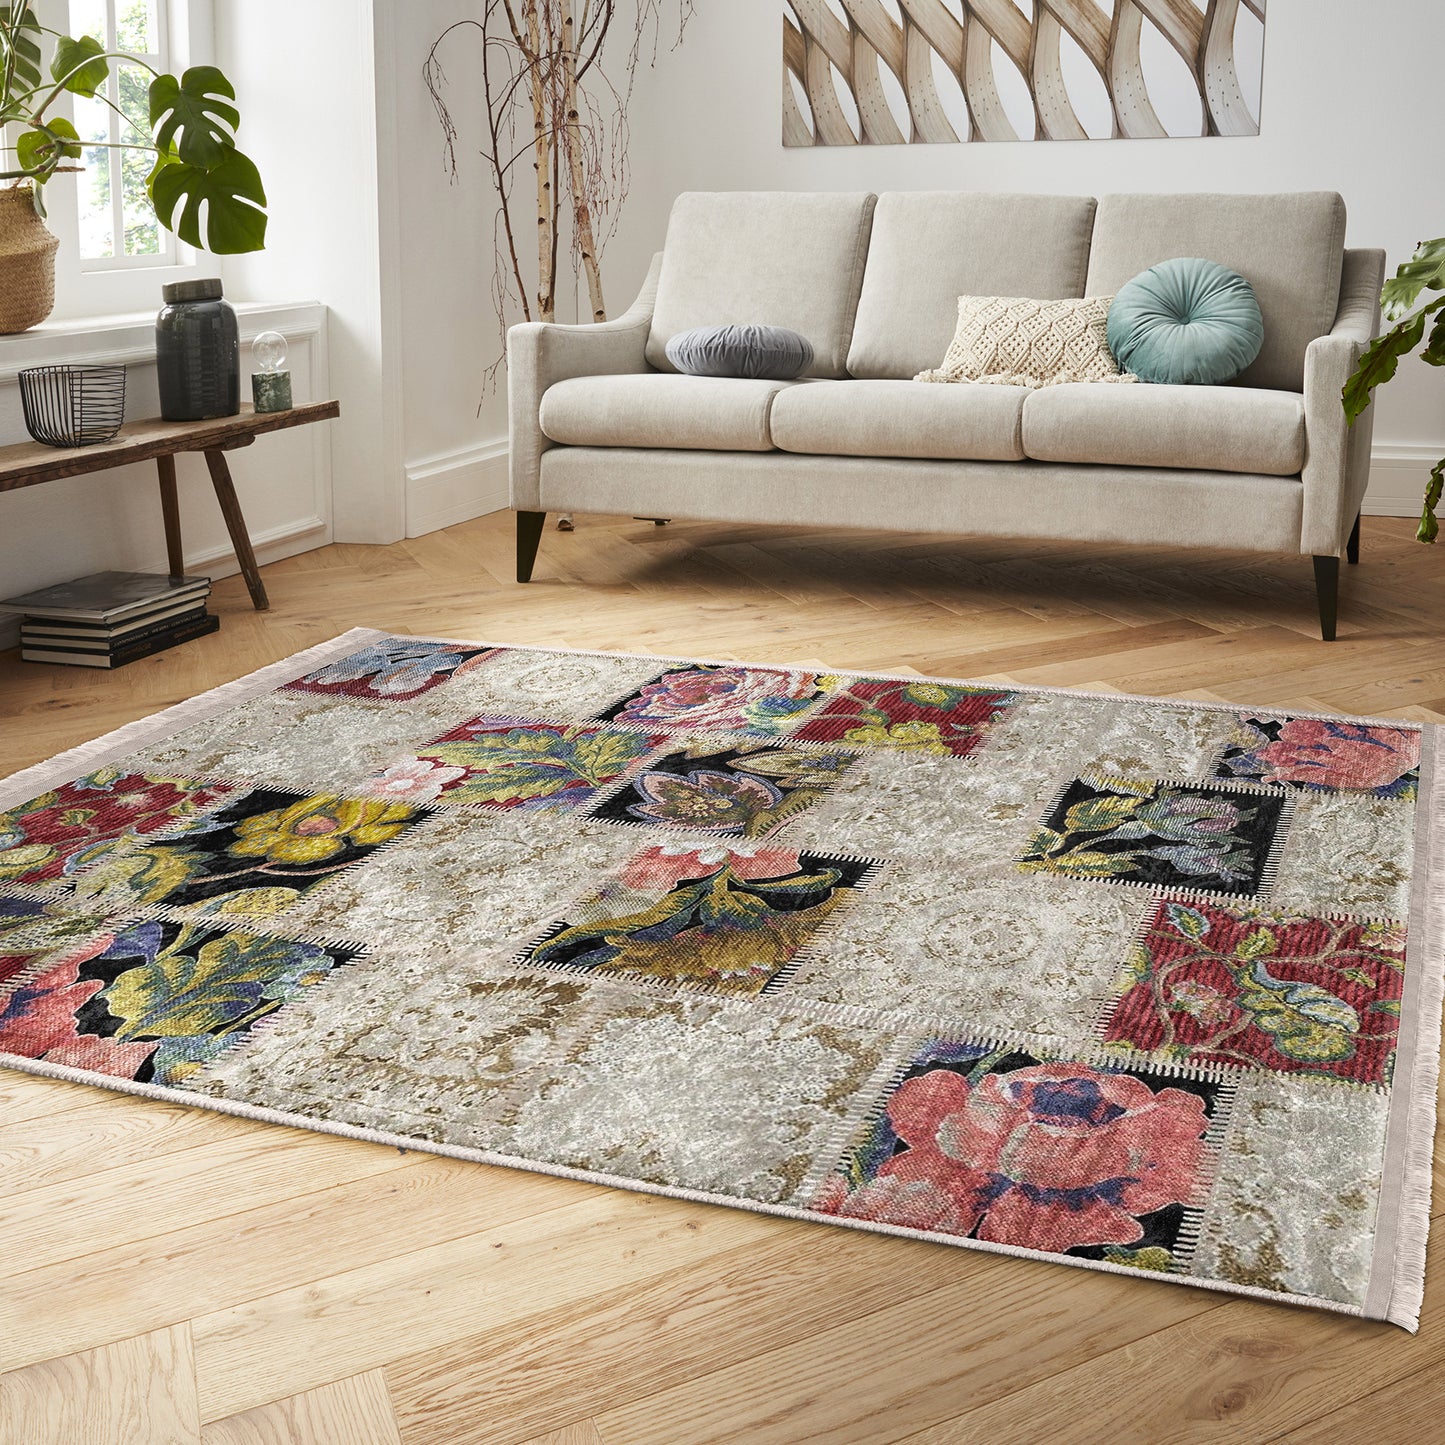 High-Quality Floral Design Checked Area Rug for Stylish Decor